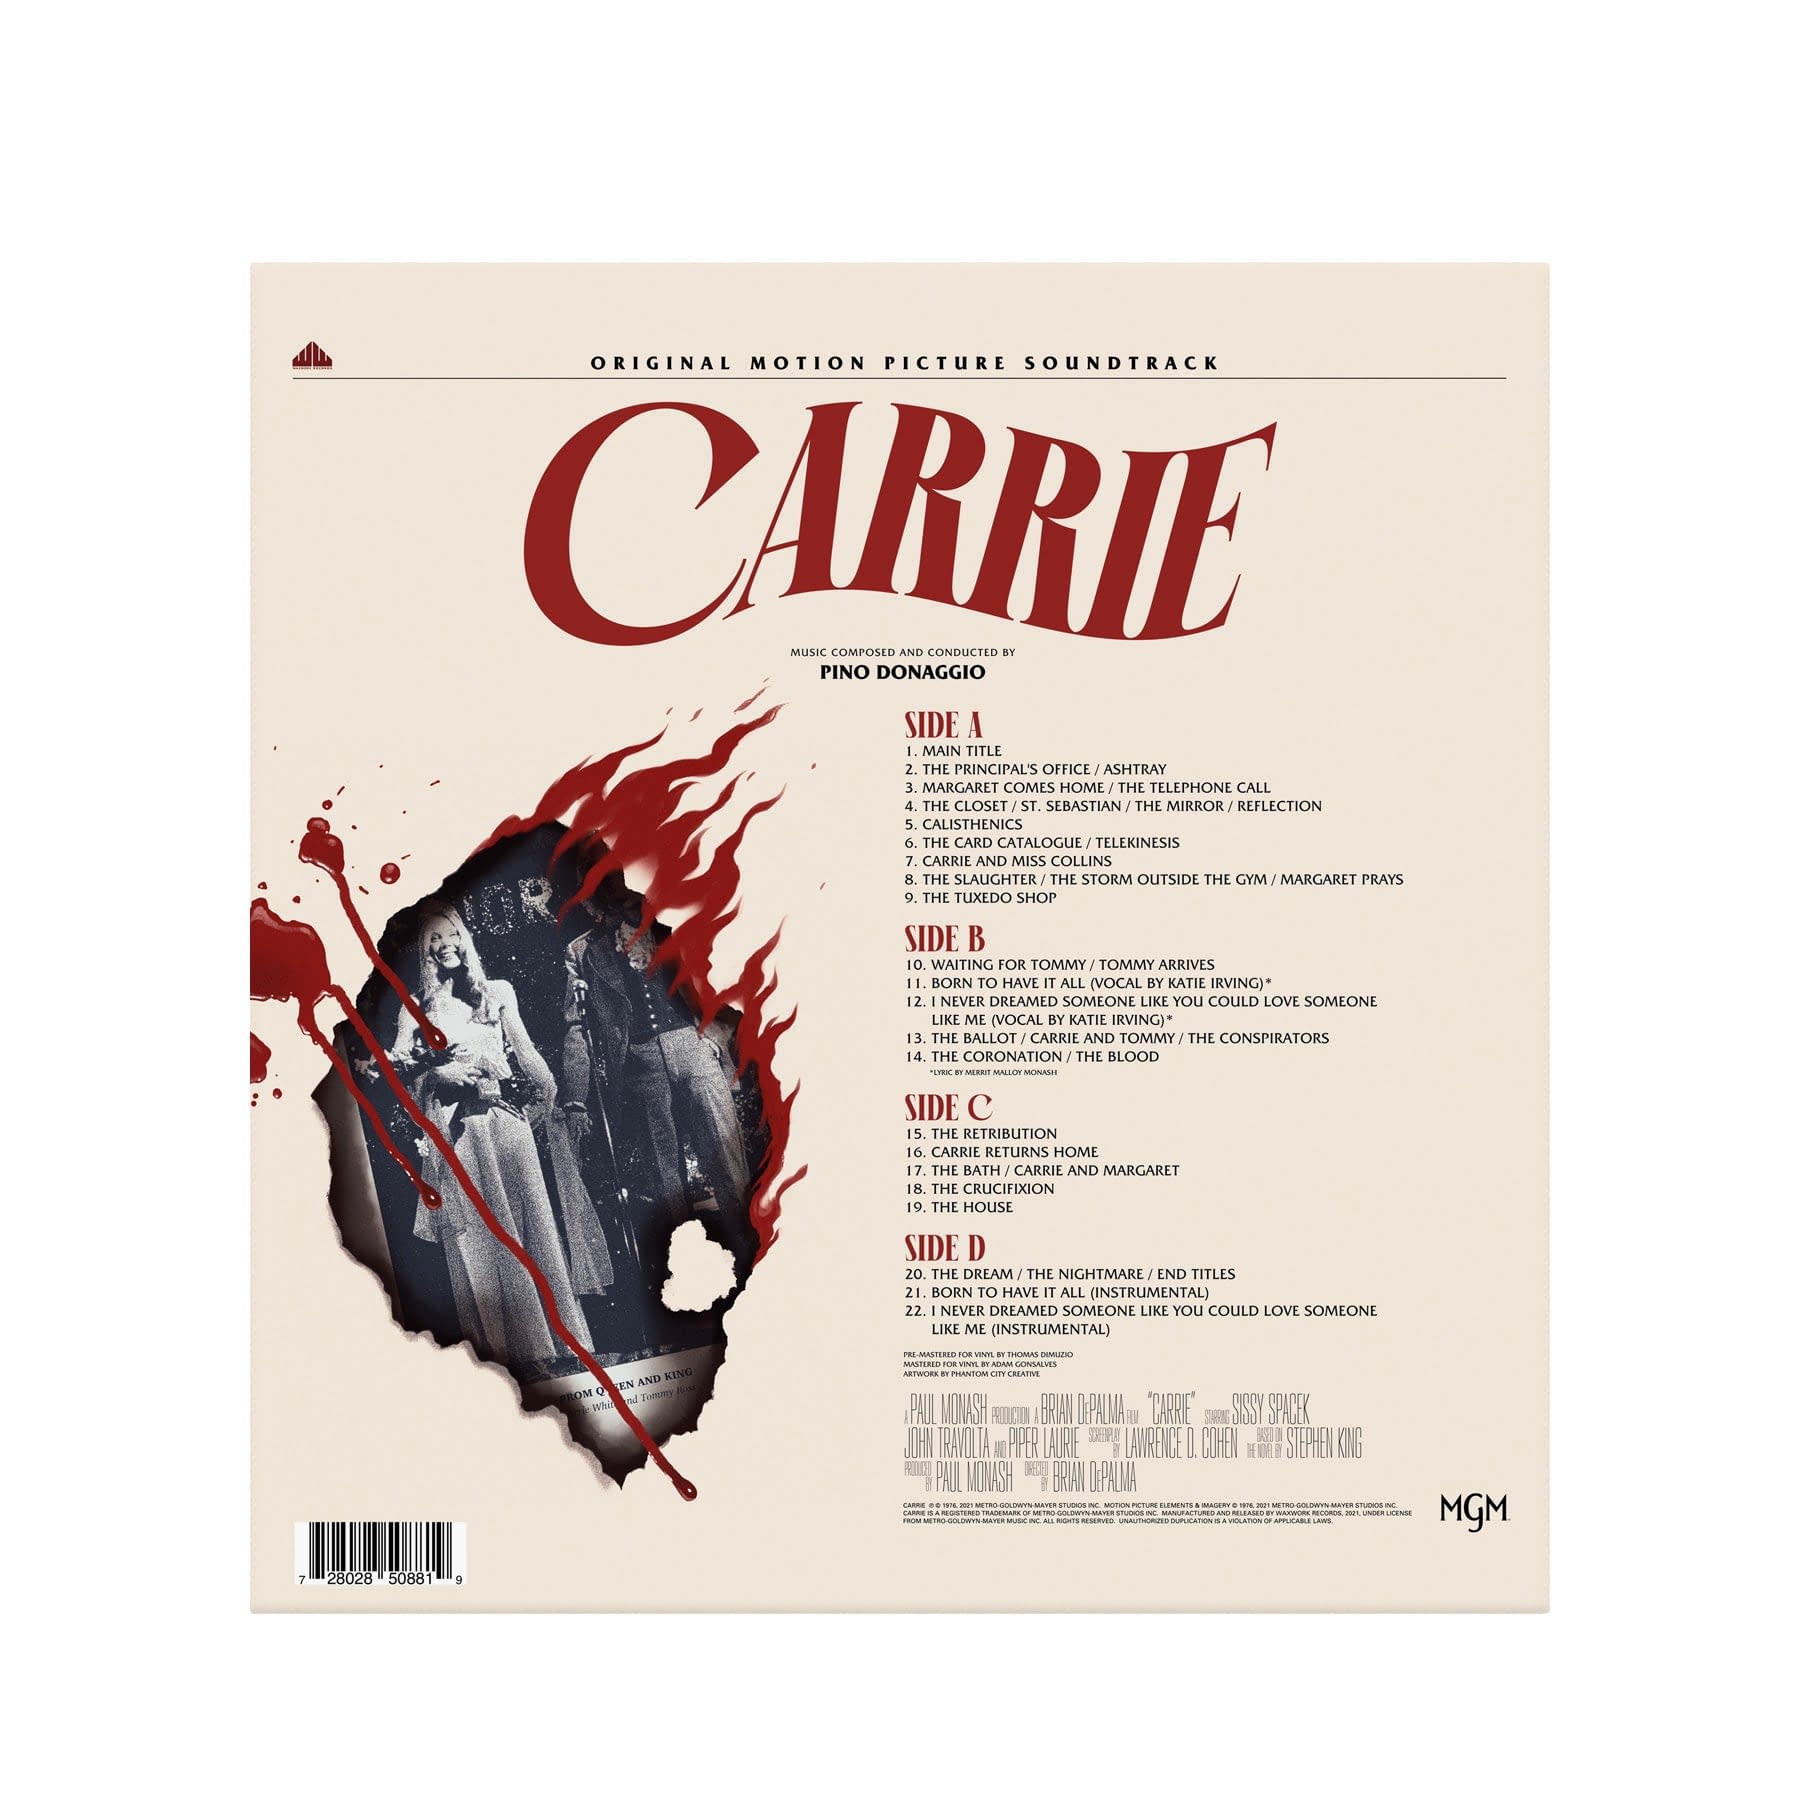 Carrie Soundtrack Available To Order From Waxwork Records